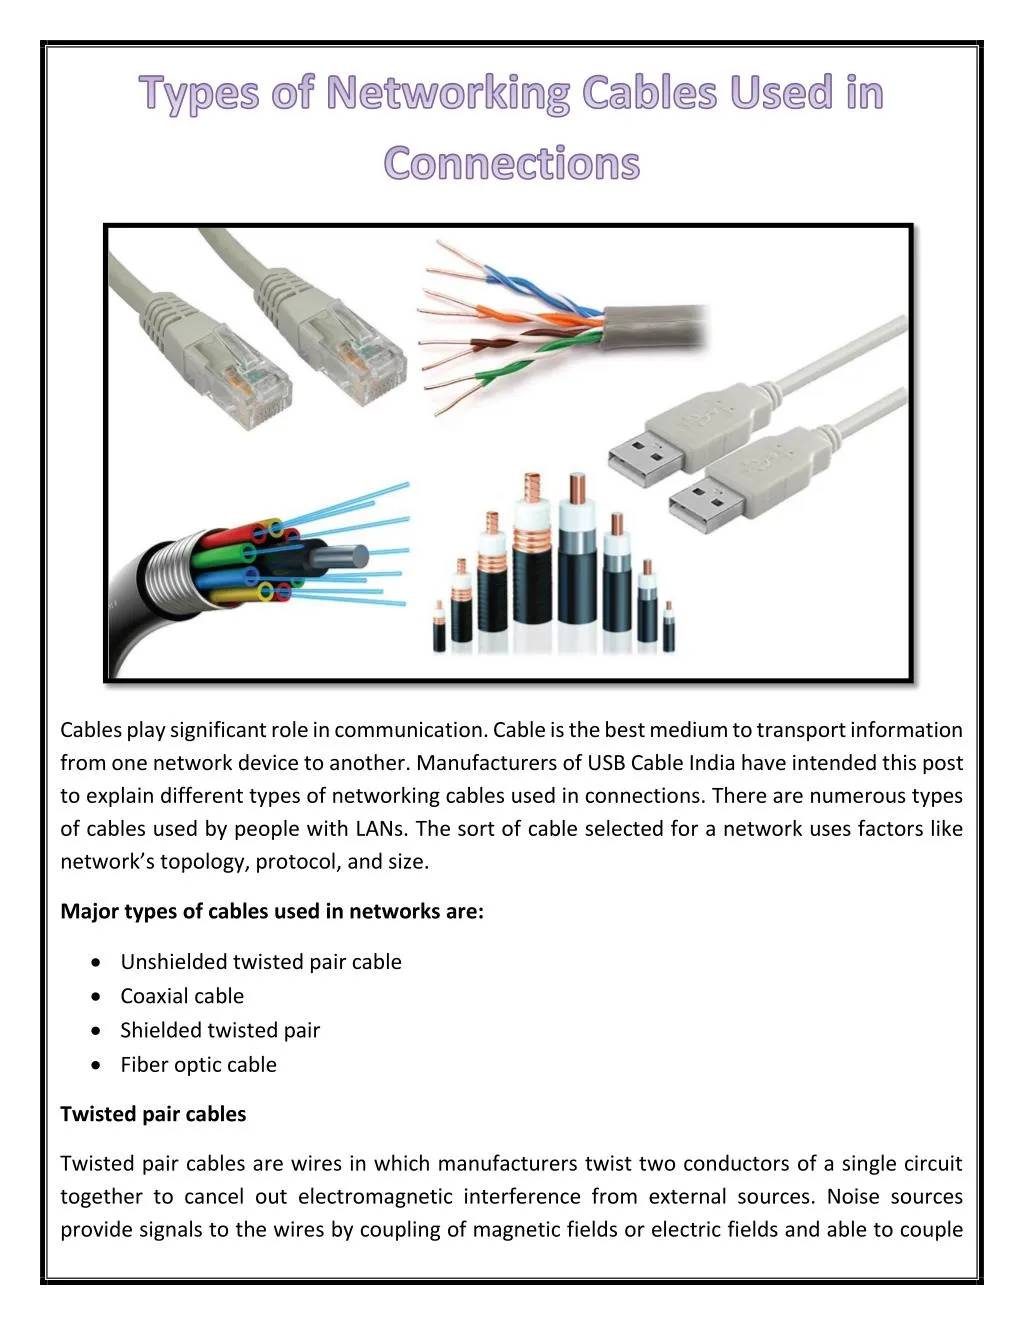 cables play significant role in communication